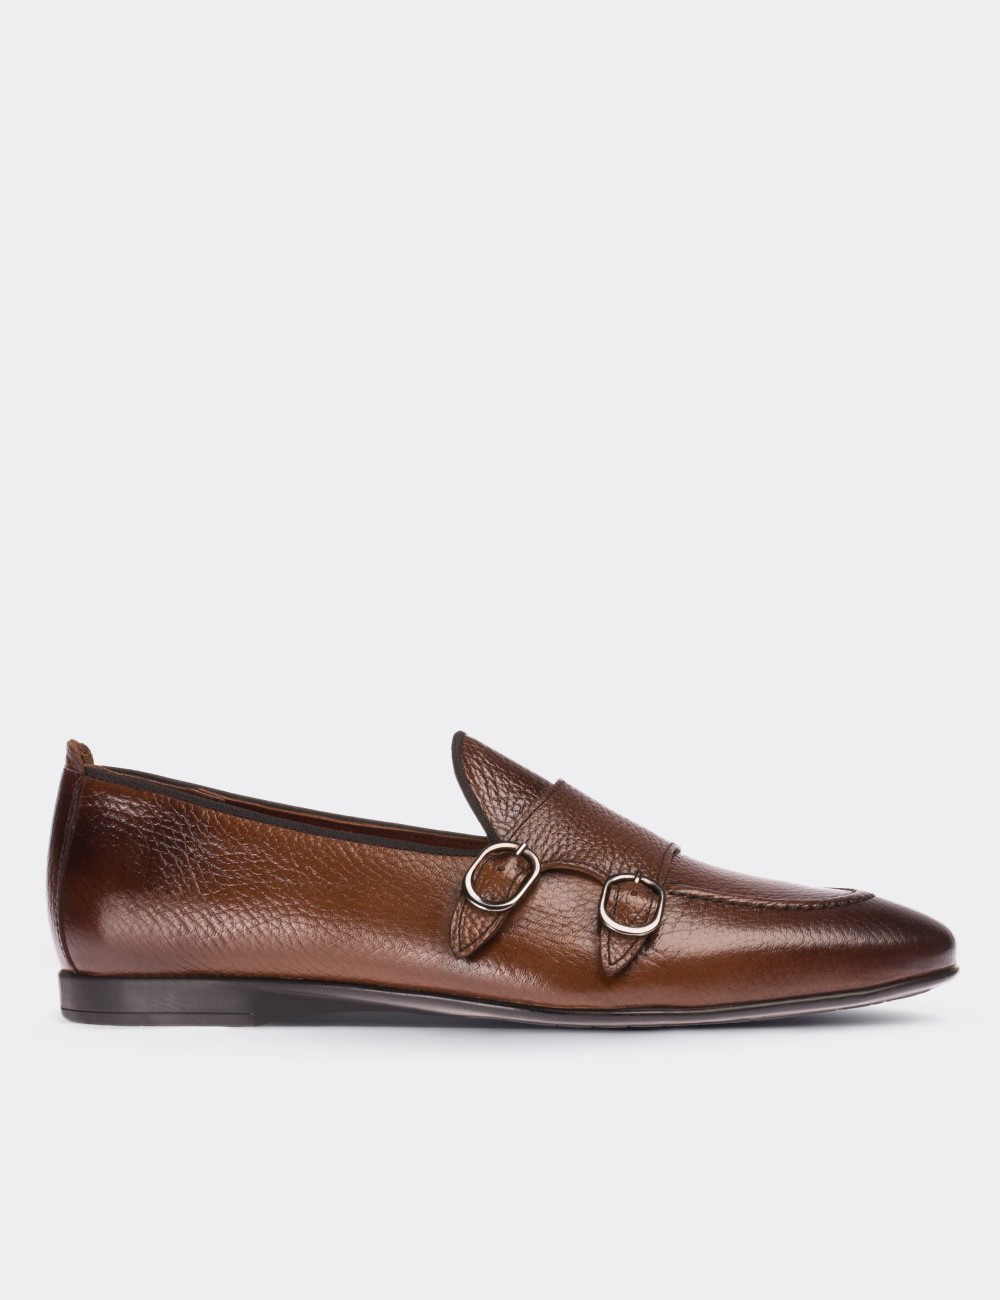 Tan  Leather Monk Strap Loafers - 01704MTBAC01